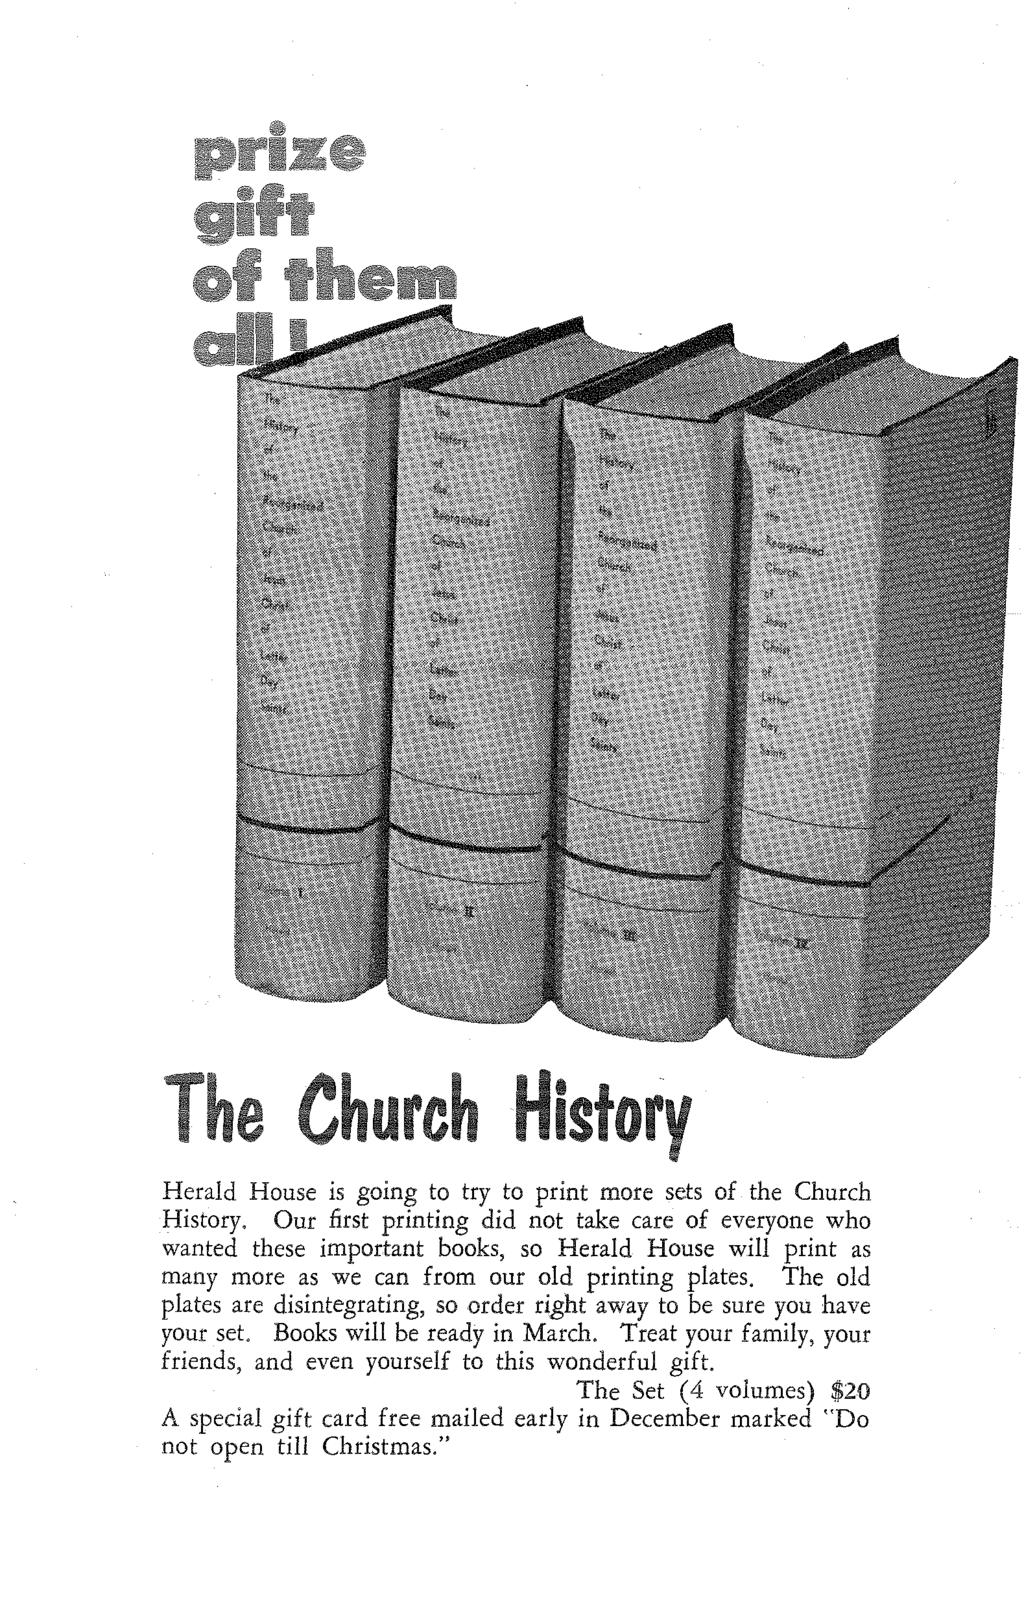 u Histo Herald House is going to try to print more sets of the Church History.